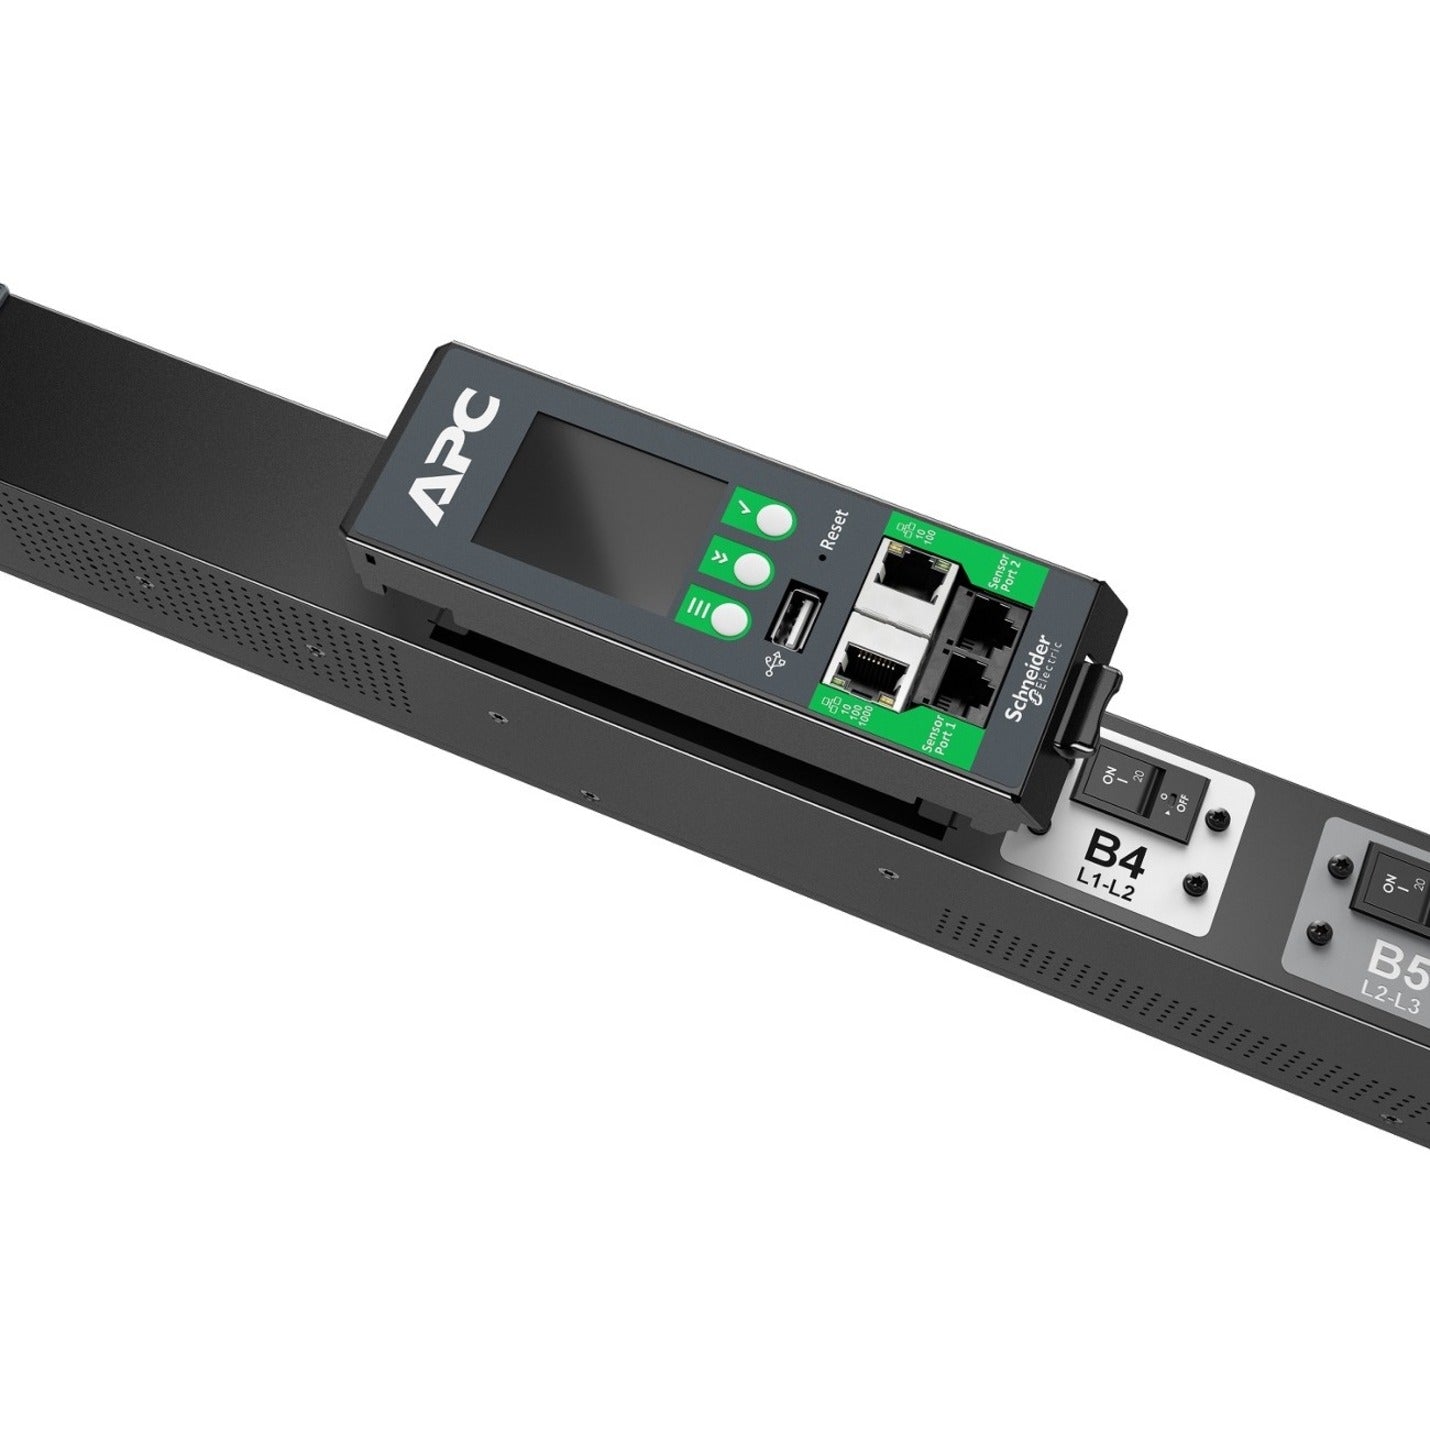 APC APDU10350ME NetShelter 48-Outlets PDU, 17.30 kW Power Rating, Three Phase, 30 A Input Current, 230 V AC Input Voltage, 240 V AC Output Voltage